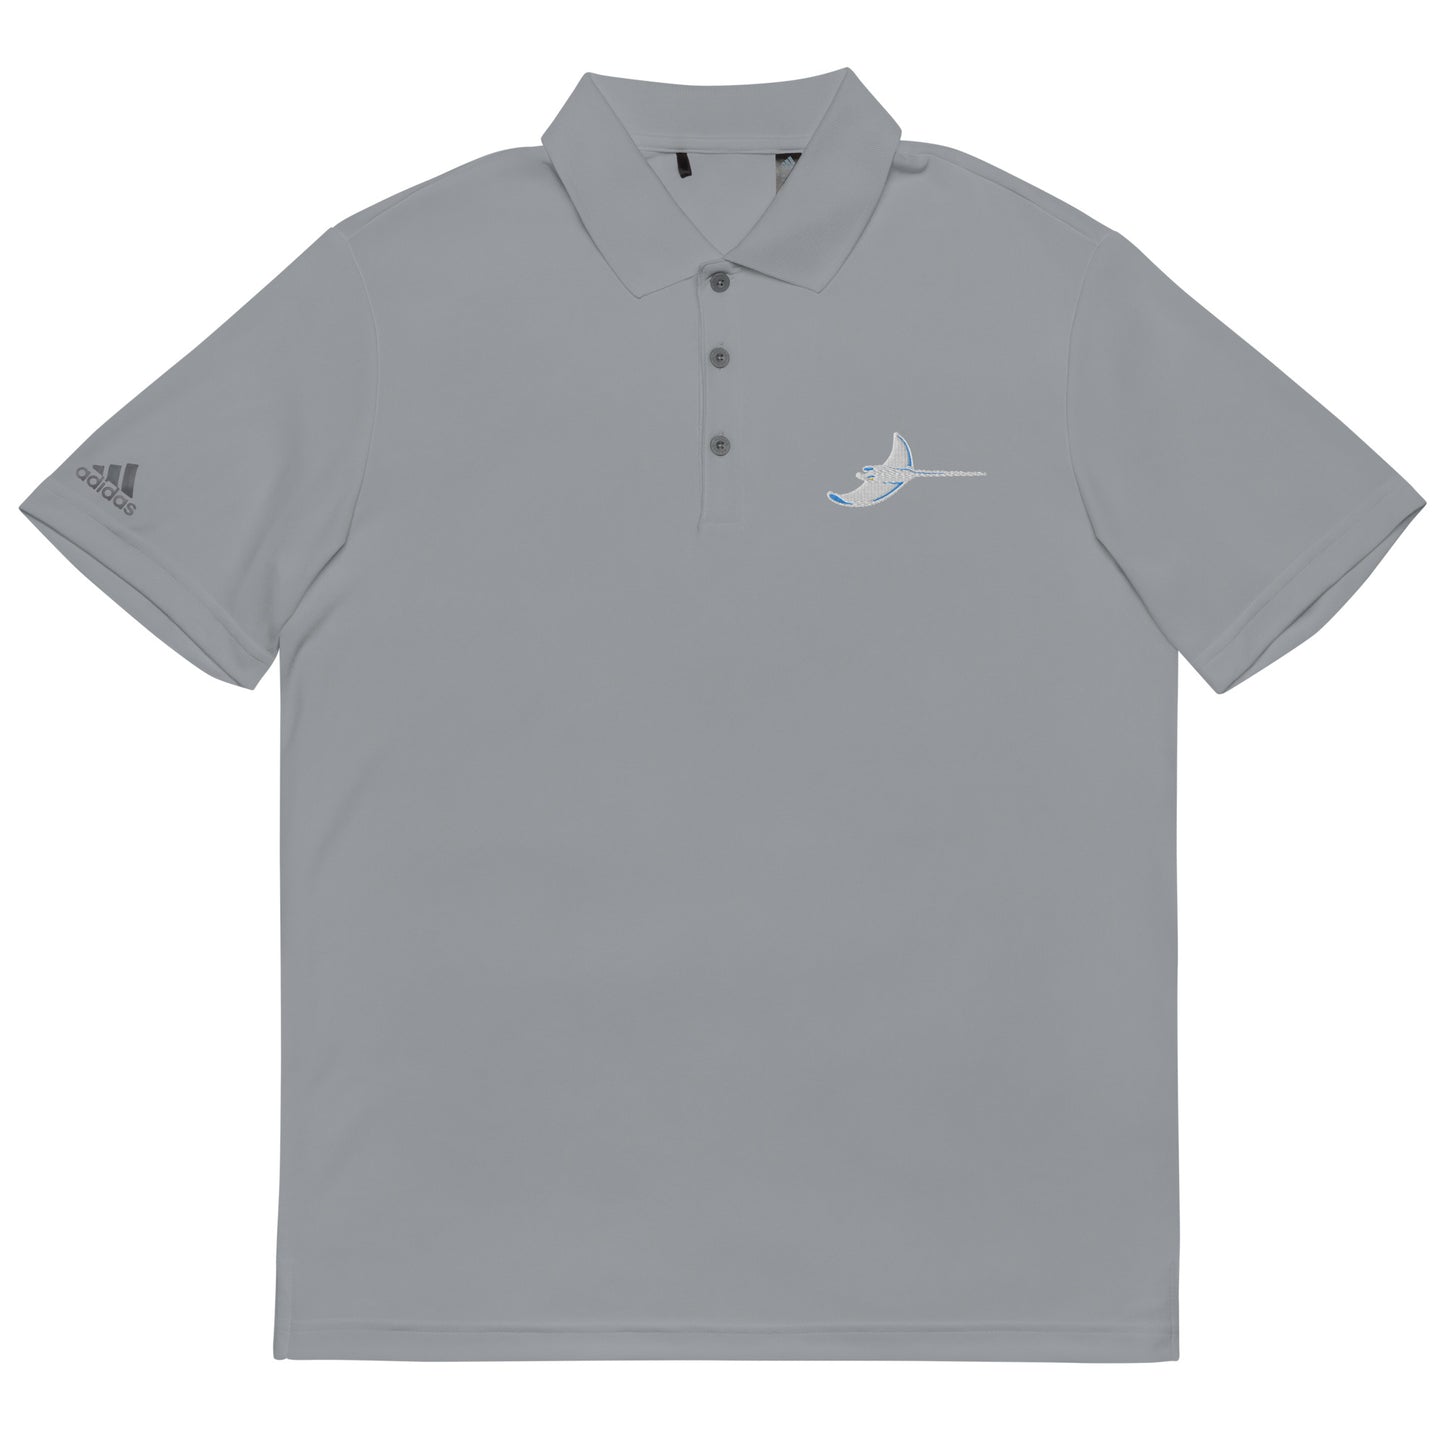 Silver Rays white ray embroidered adidas performance polo shirt